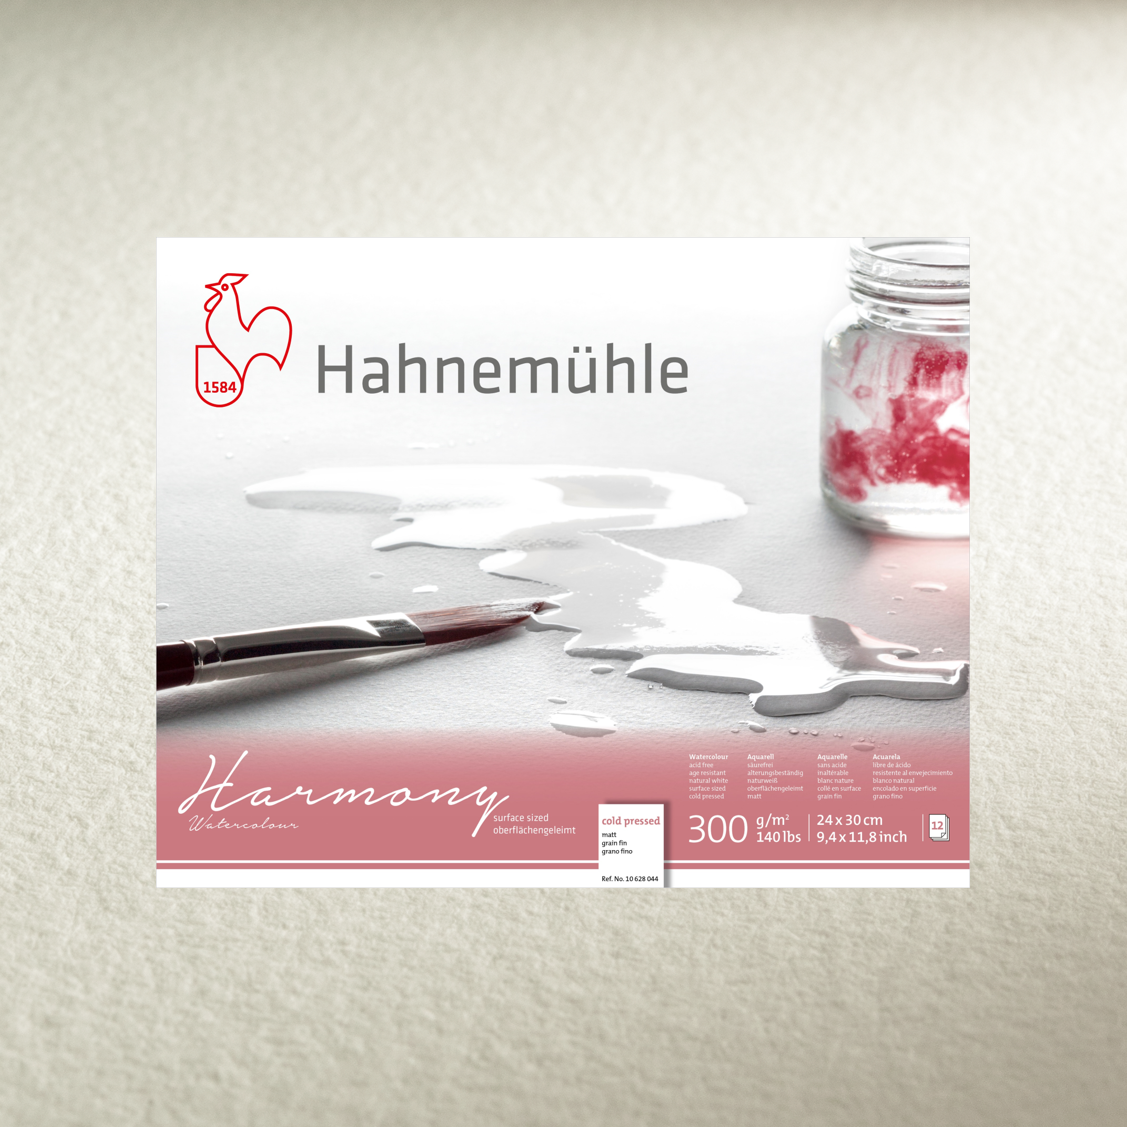 Hahnemuhle Harmony Watercolour Rolle